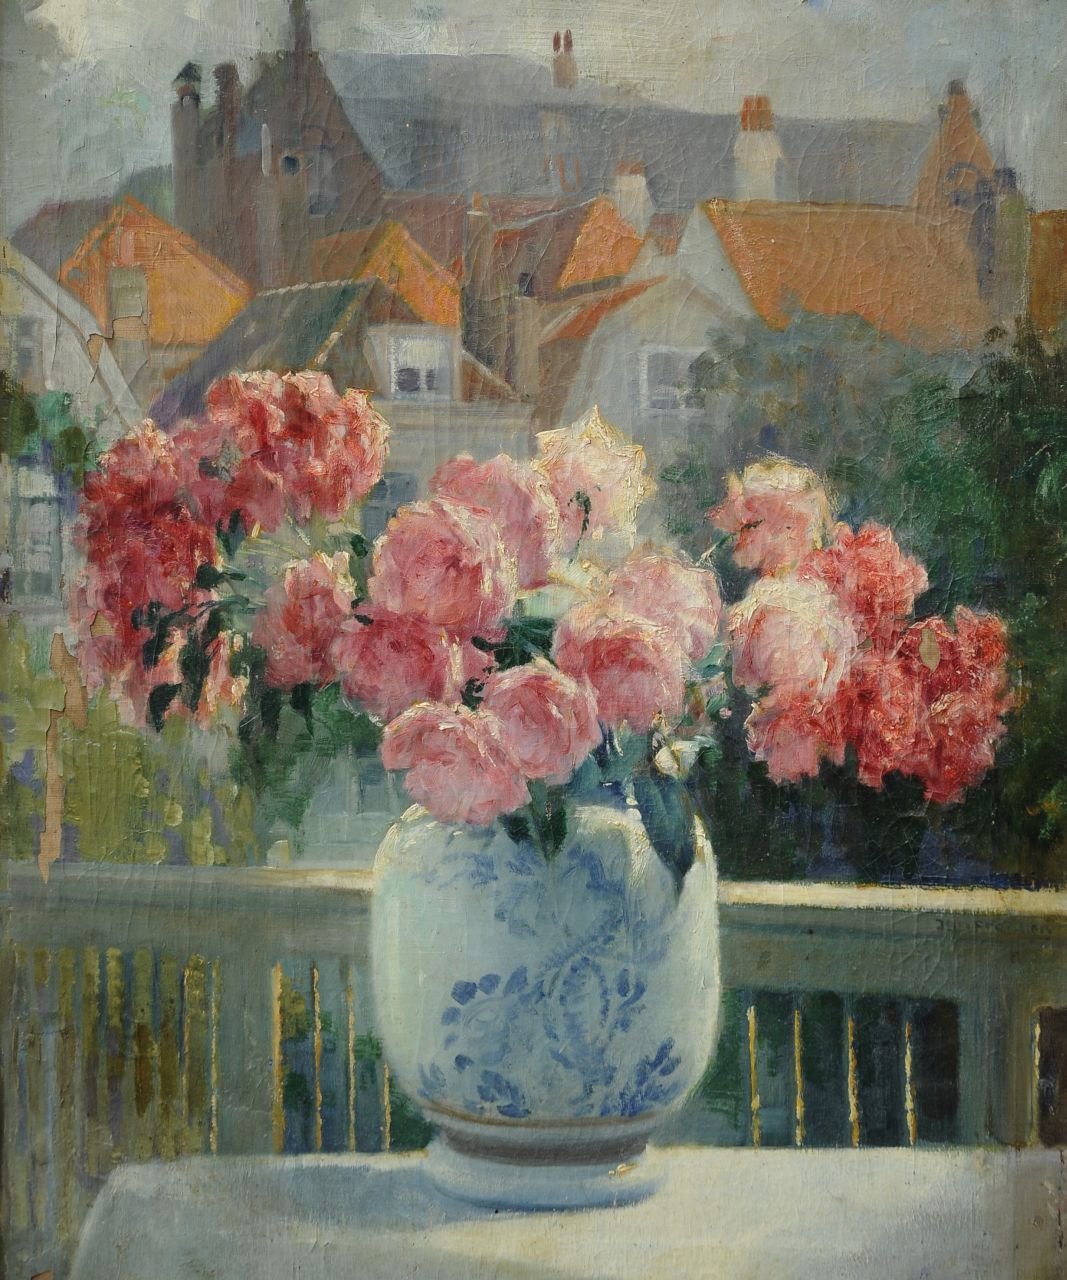 Franken J.H.  | Joannes Henricus 'Jan' Franken | Paintings offered for sale | Flowers in a vase on a balcony with townview, oil on canvas 61.7 x 50.2 cm, signed l.r. on the balcony railing